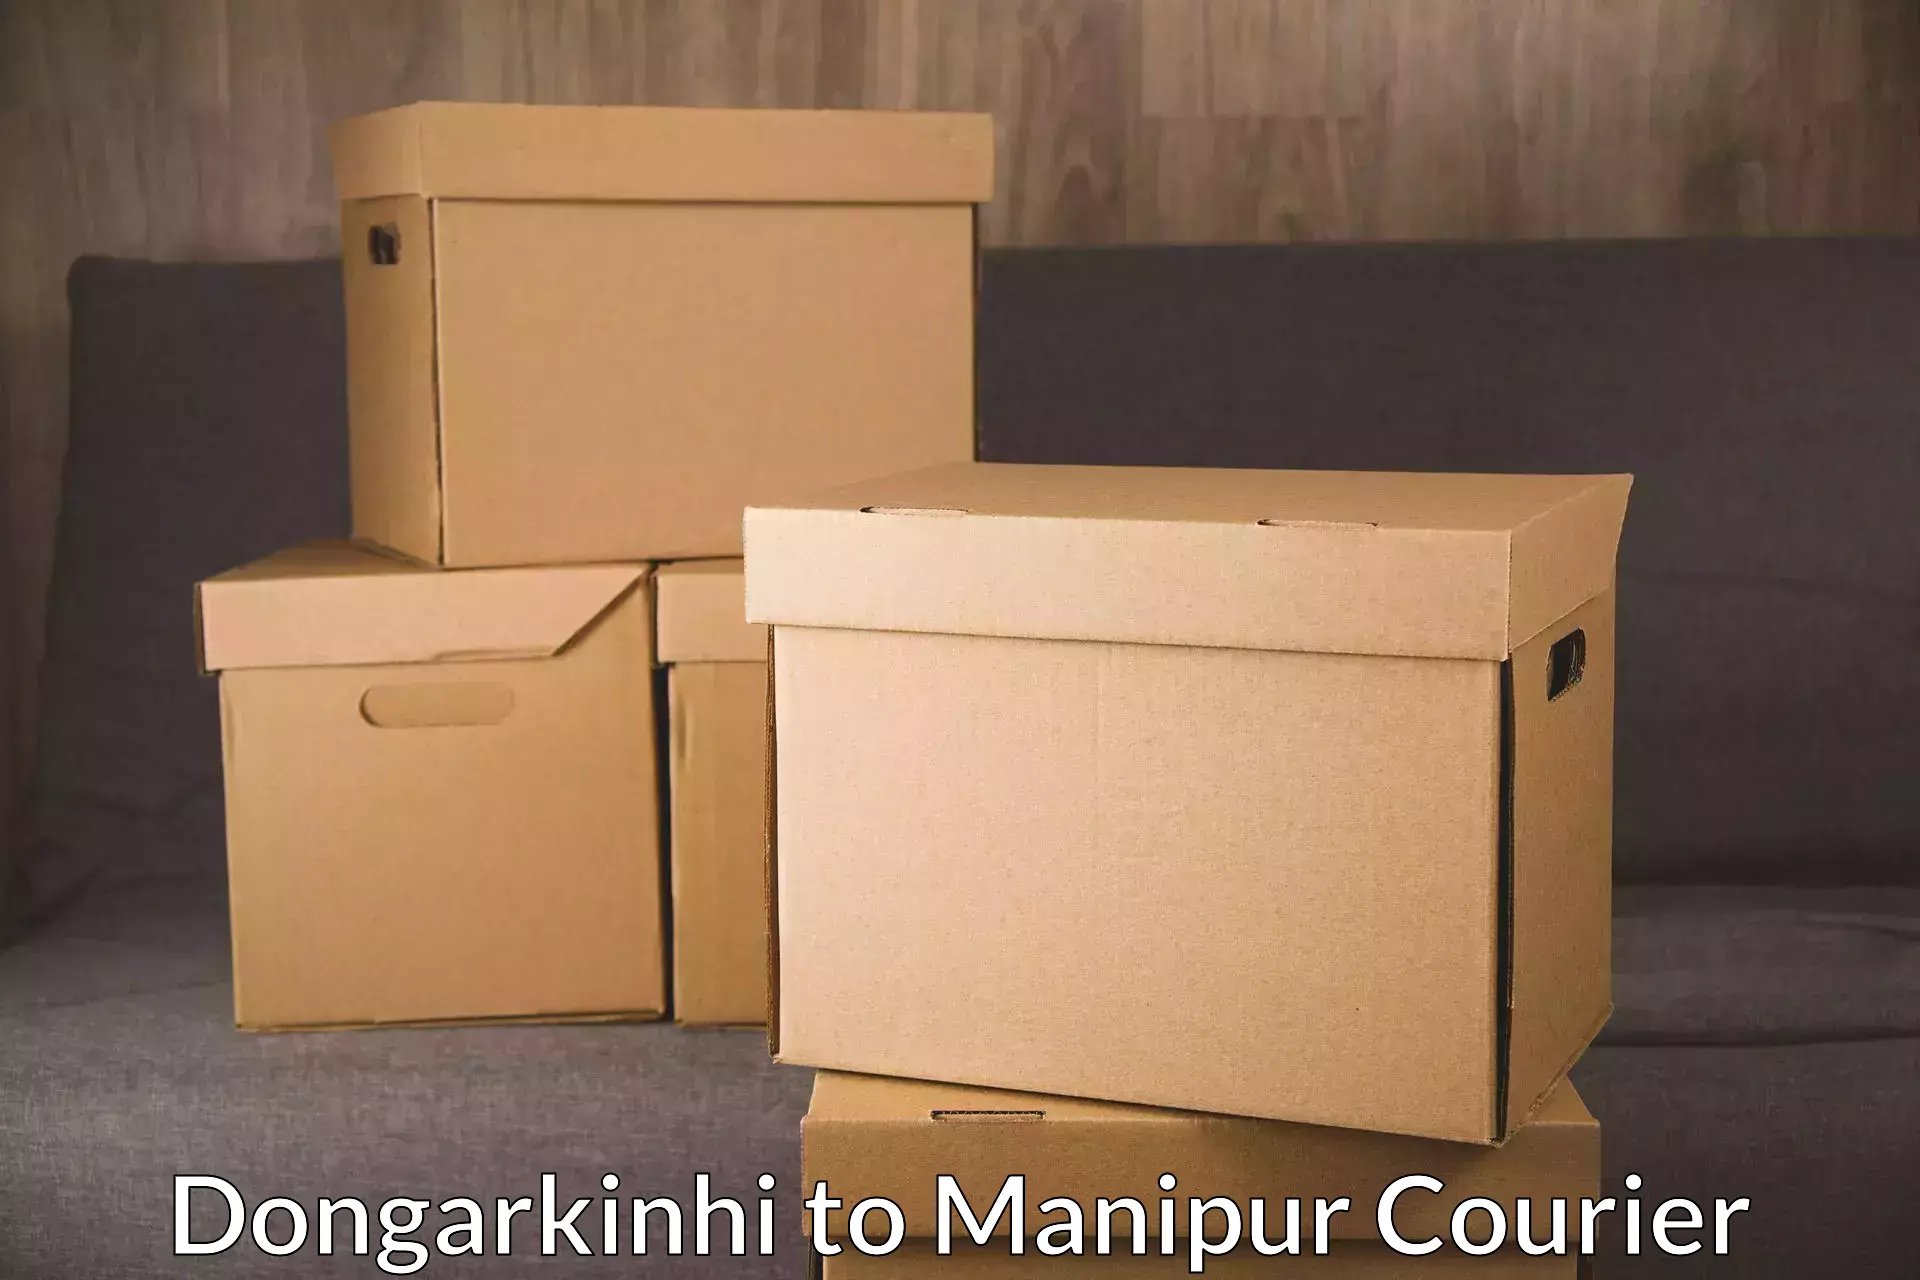 Premium delivery services Dongarkinhi to Chandel